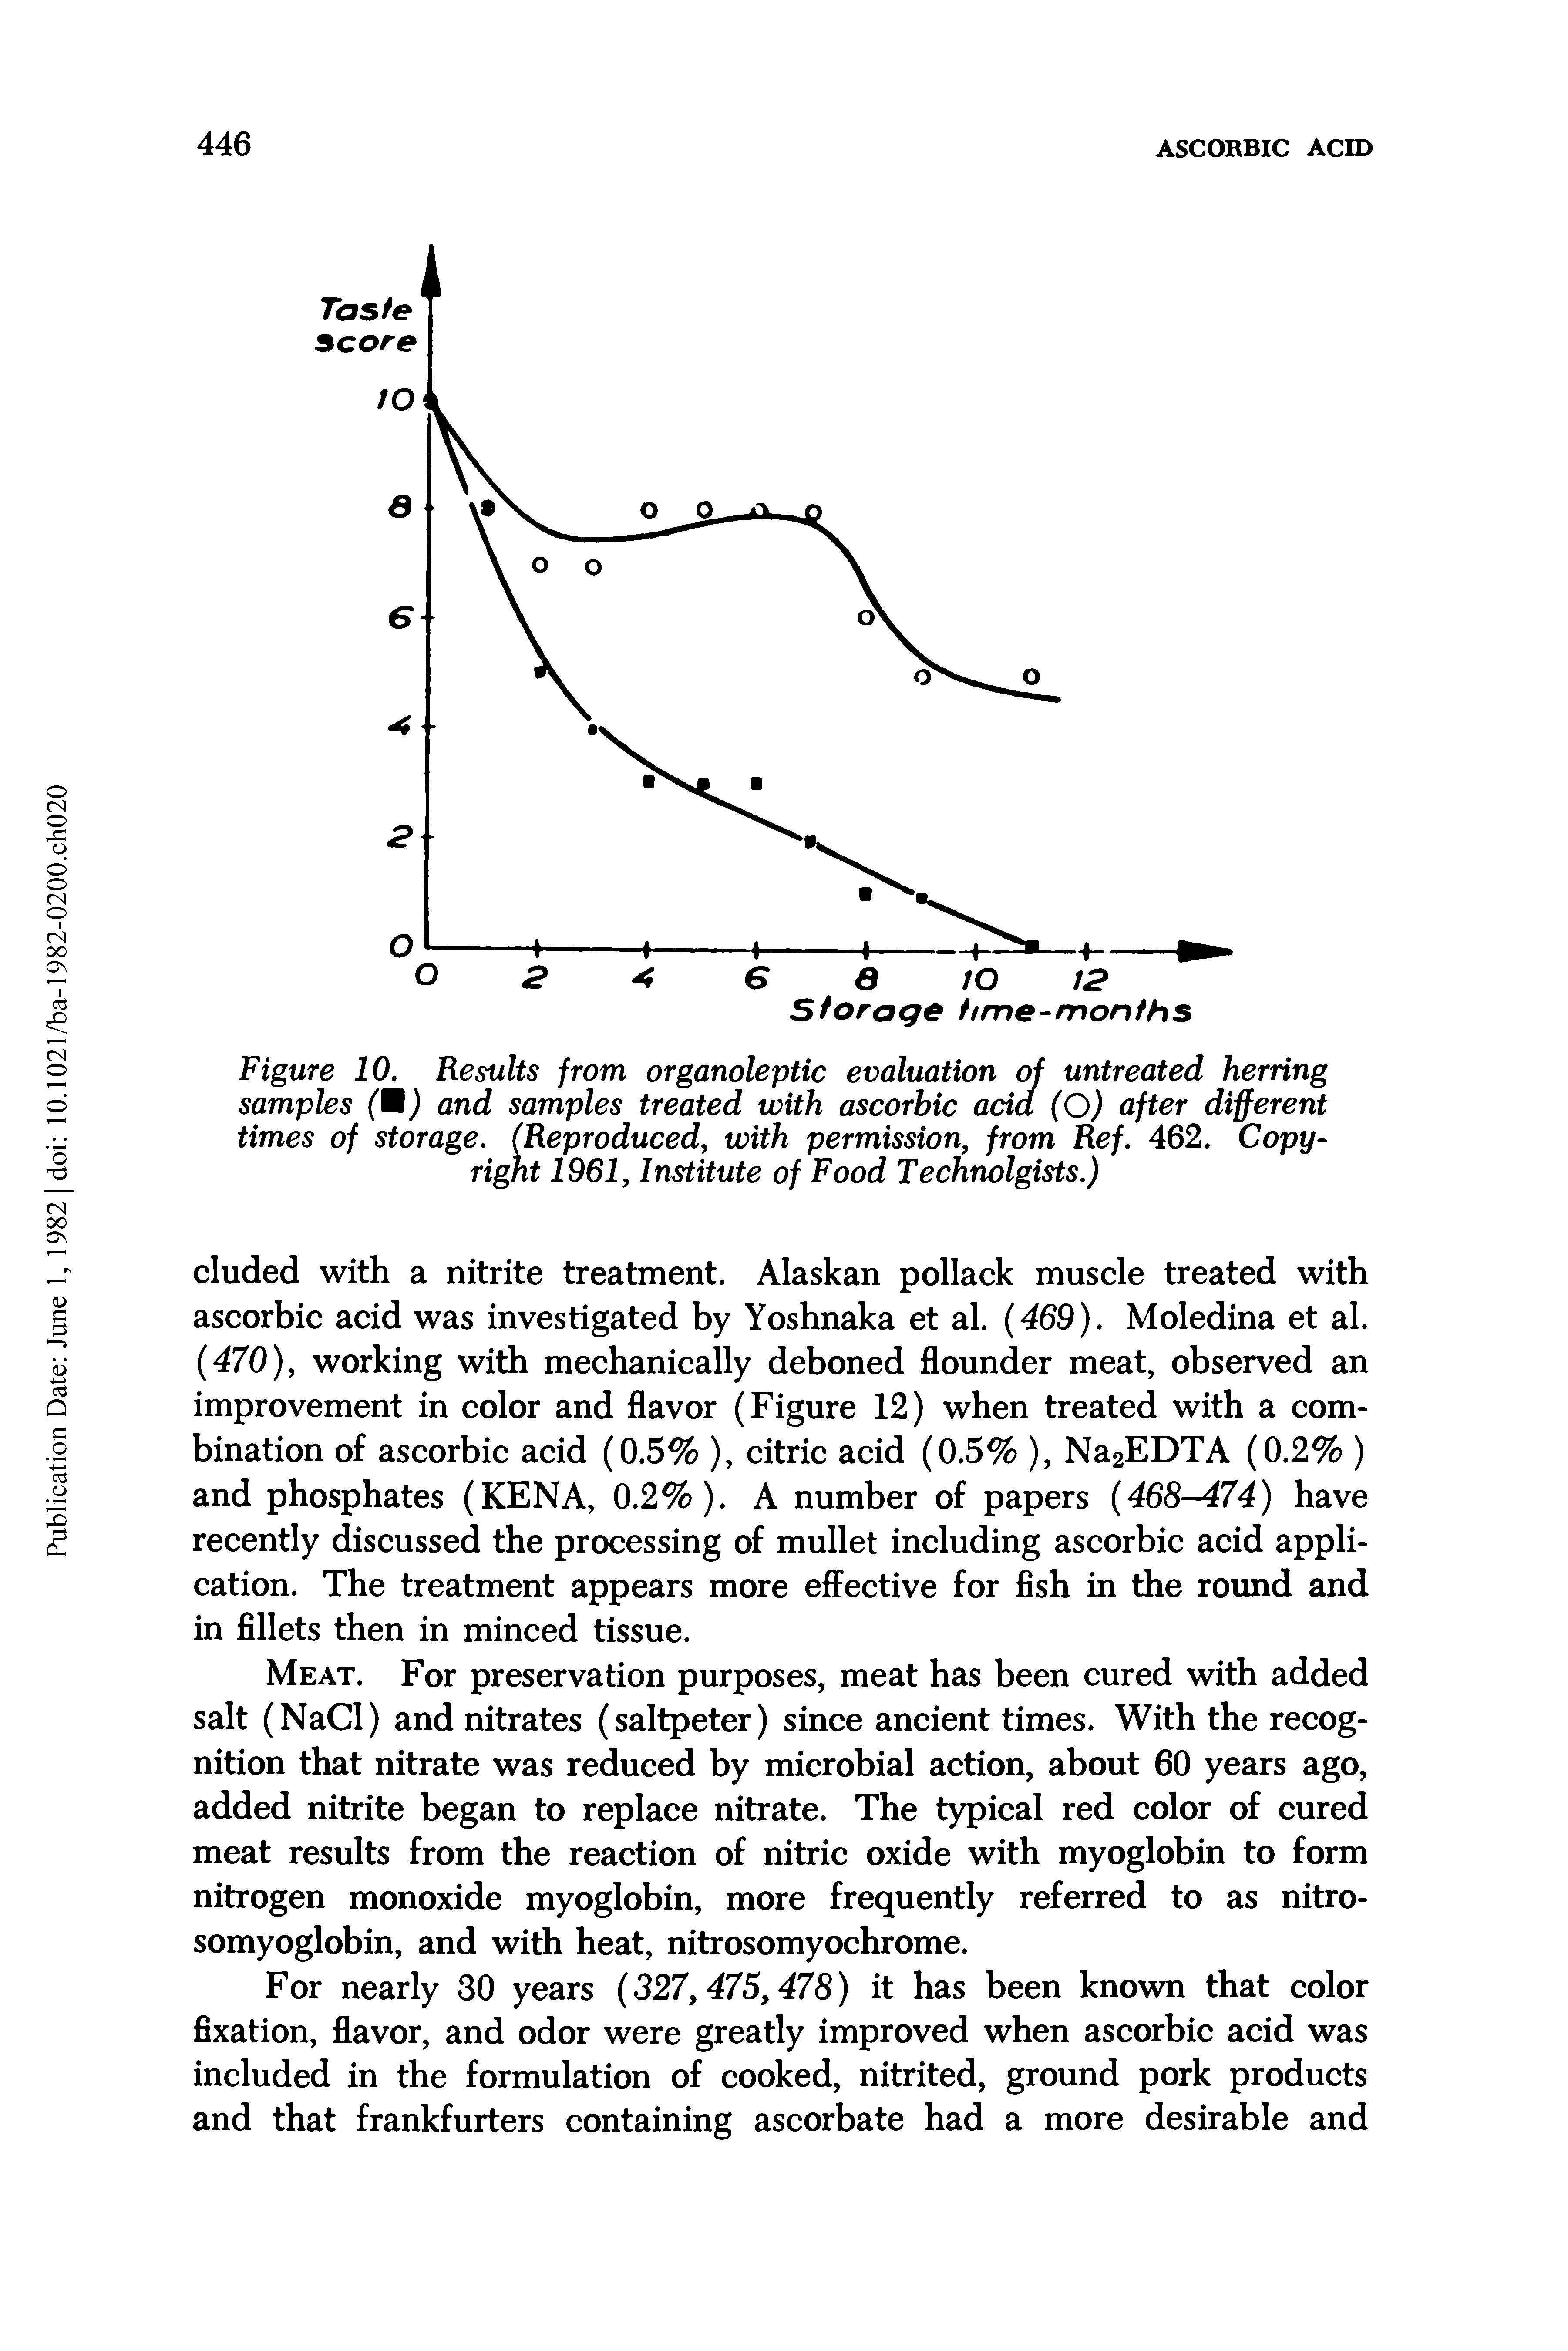 Figure 10. Results from organoleptic evaluation of untreated herring samples (M) and samples treated with ascorbic acid (O) after different times of storage. (Reproduced, with permission, from Ref. 462. Copy-right 1961, Institute of Food Technolgists.)...